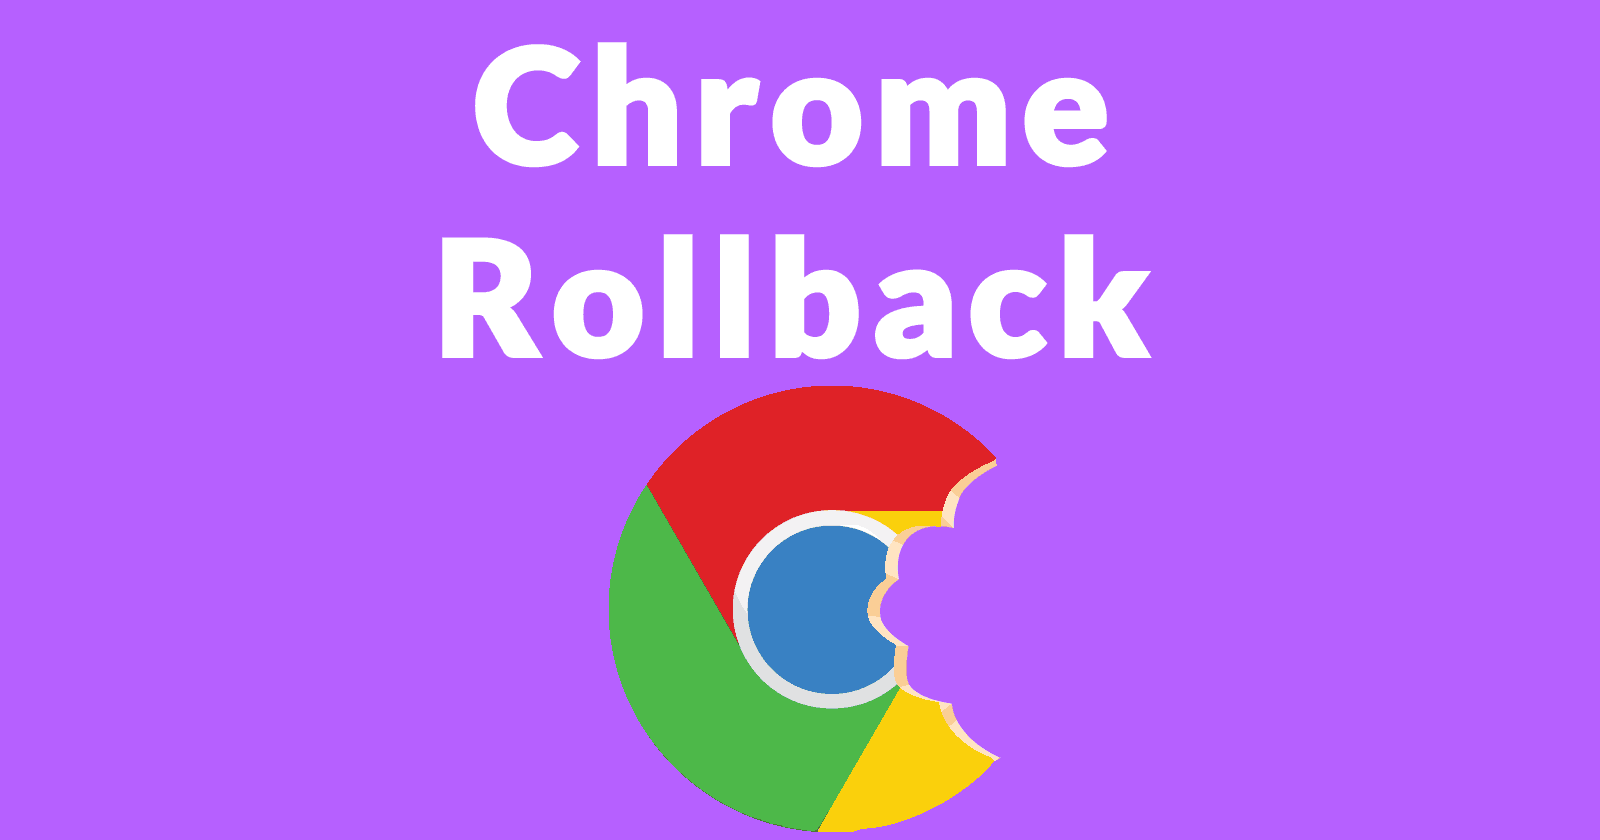 Image of Chrome browser logo with a cookie bite taken out of it and the words, Chrome Rollback